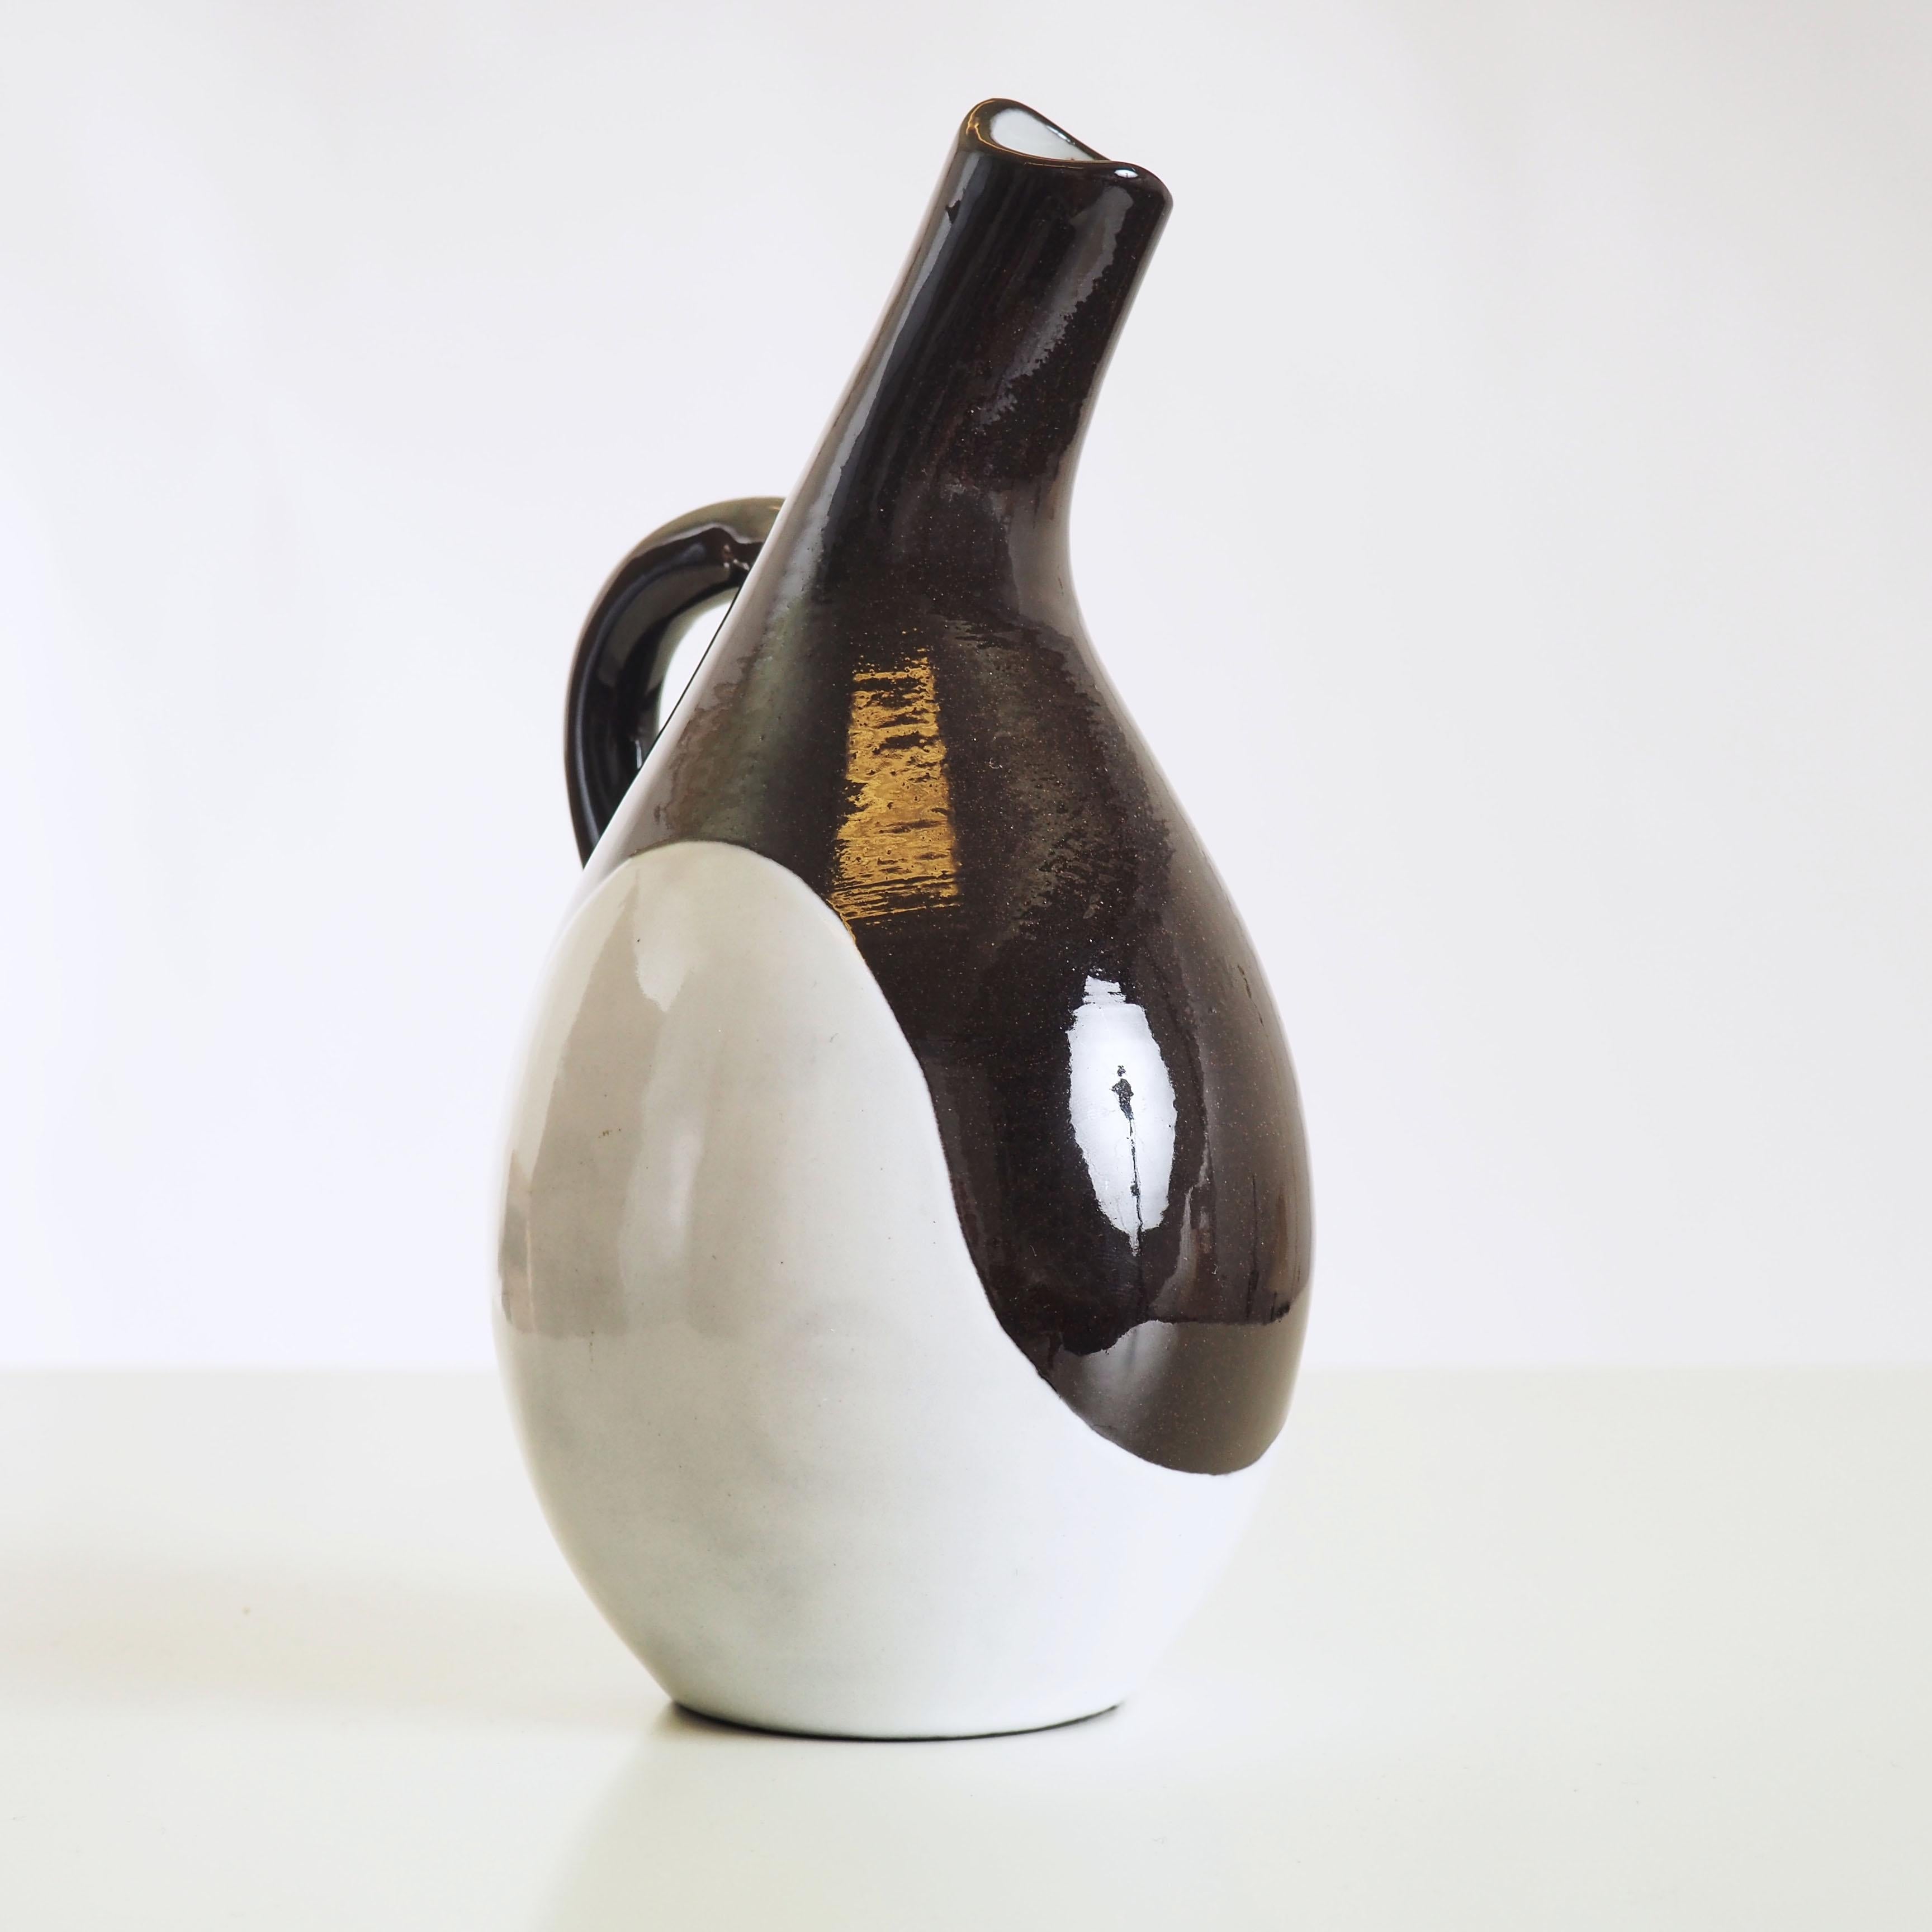 Vase made in 1954 by the Swedish designer Hjördis Oldfors. Typical decor for the Swedish, 1950s.